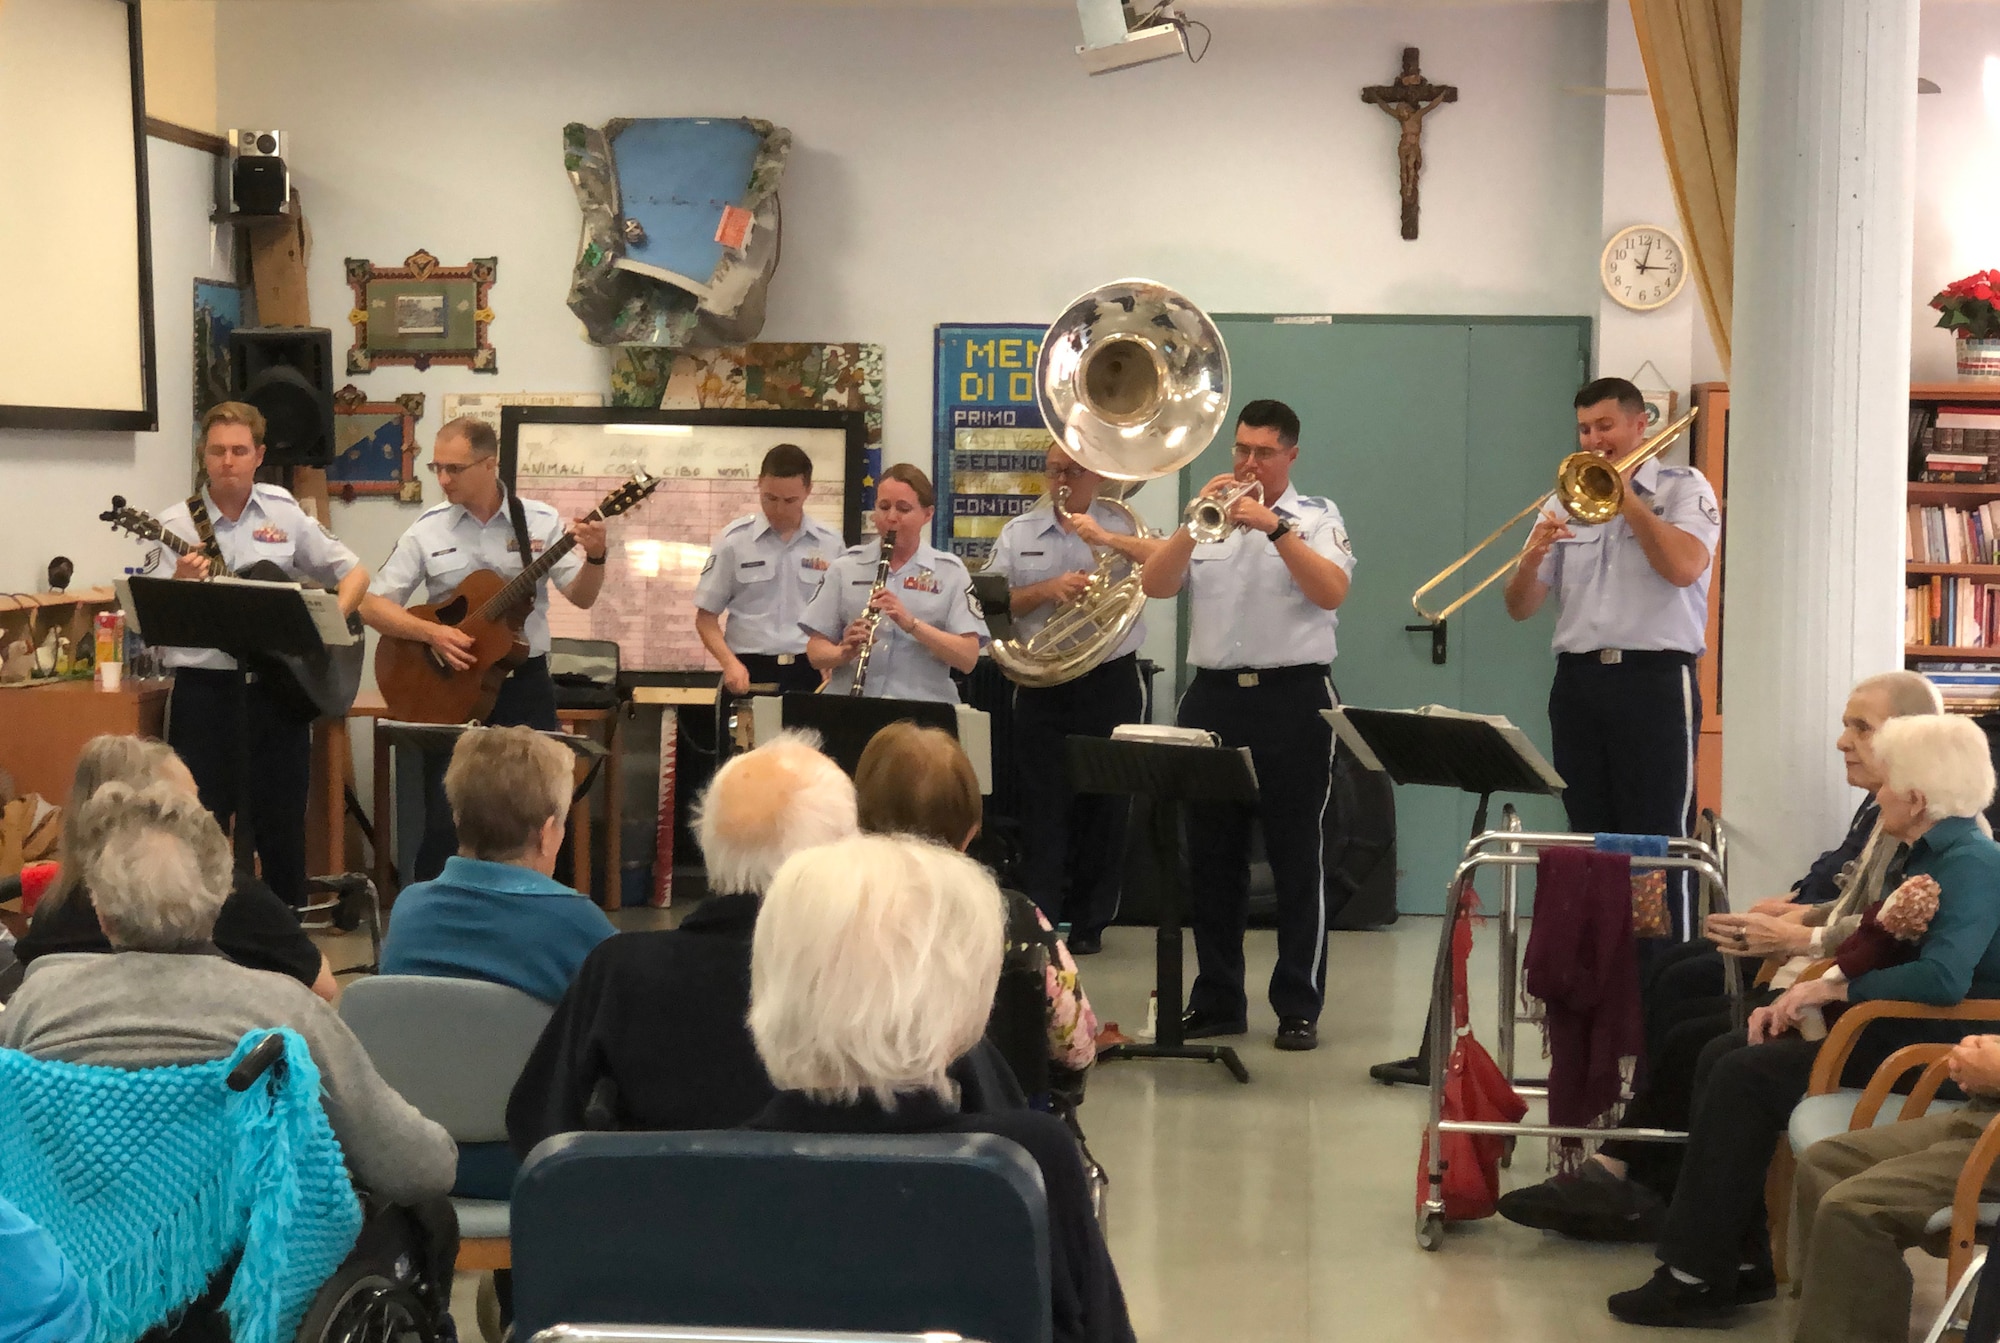 U.S. Air Forces in Europe and Air Forces Africa band, Wings of Dixie, play for residents at a community elderly home in Aviano, Italy, Oct. 3, 2019. Wings of Dixie travels throughout Europe and Africa playing their version of up-beat, toe-tapping Dixieland jazz. (U.S. Air Force photo by Julie Scott)